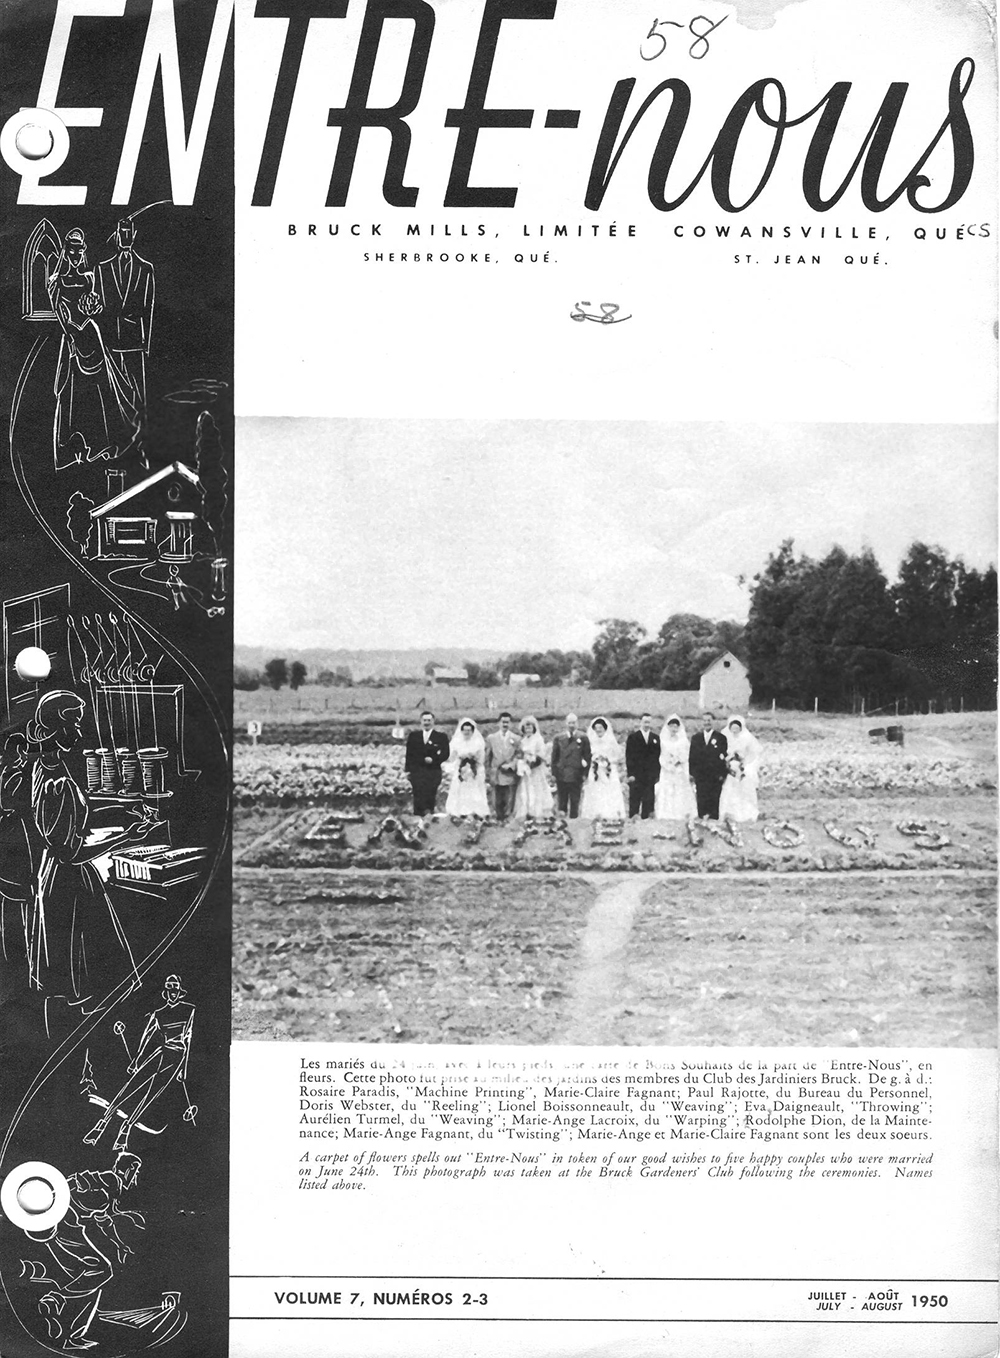 Cover page of Entre-Nous magazine from July-August 1950 with a photo of 5 newlywed couples in front of a flower bed with the words BETWEEN US written with flowers.